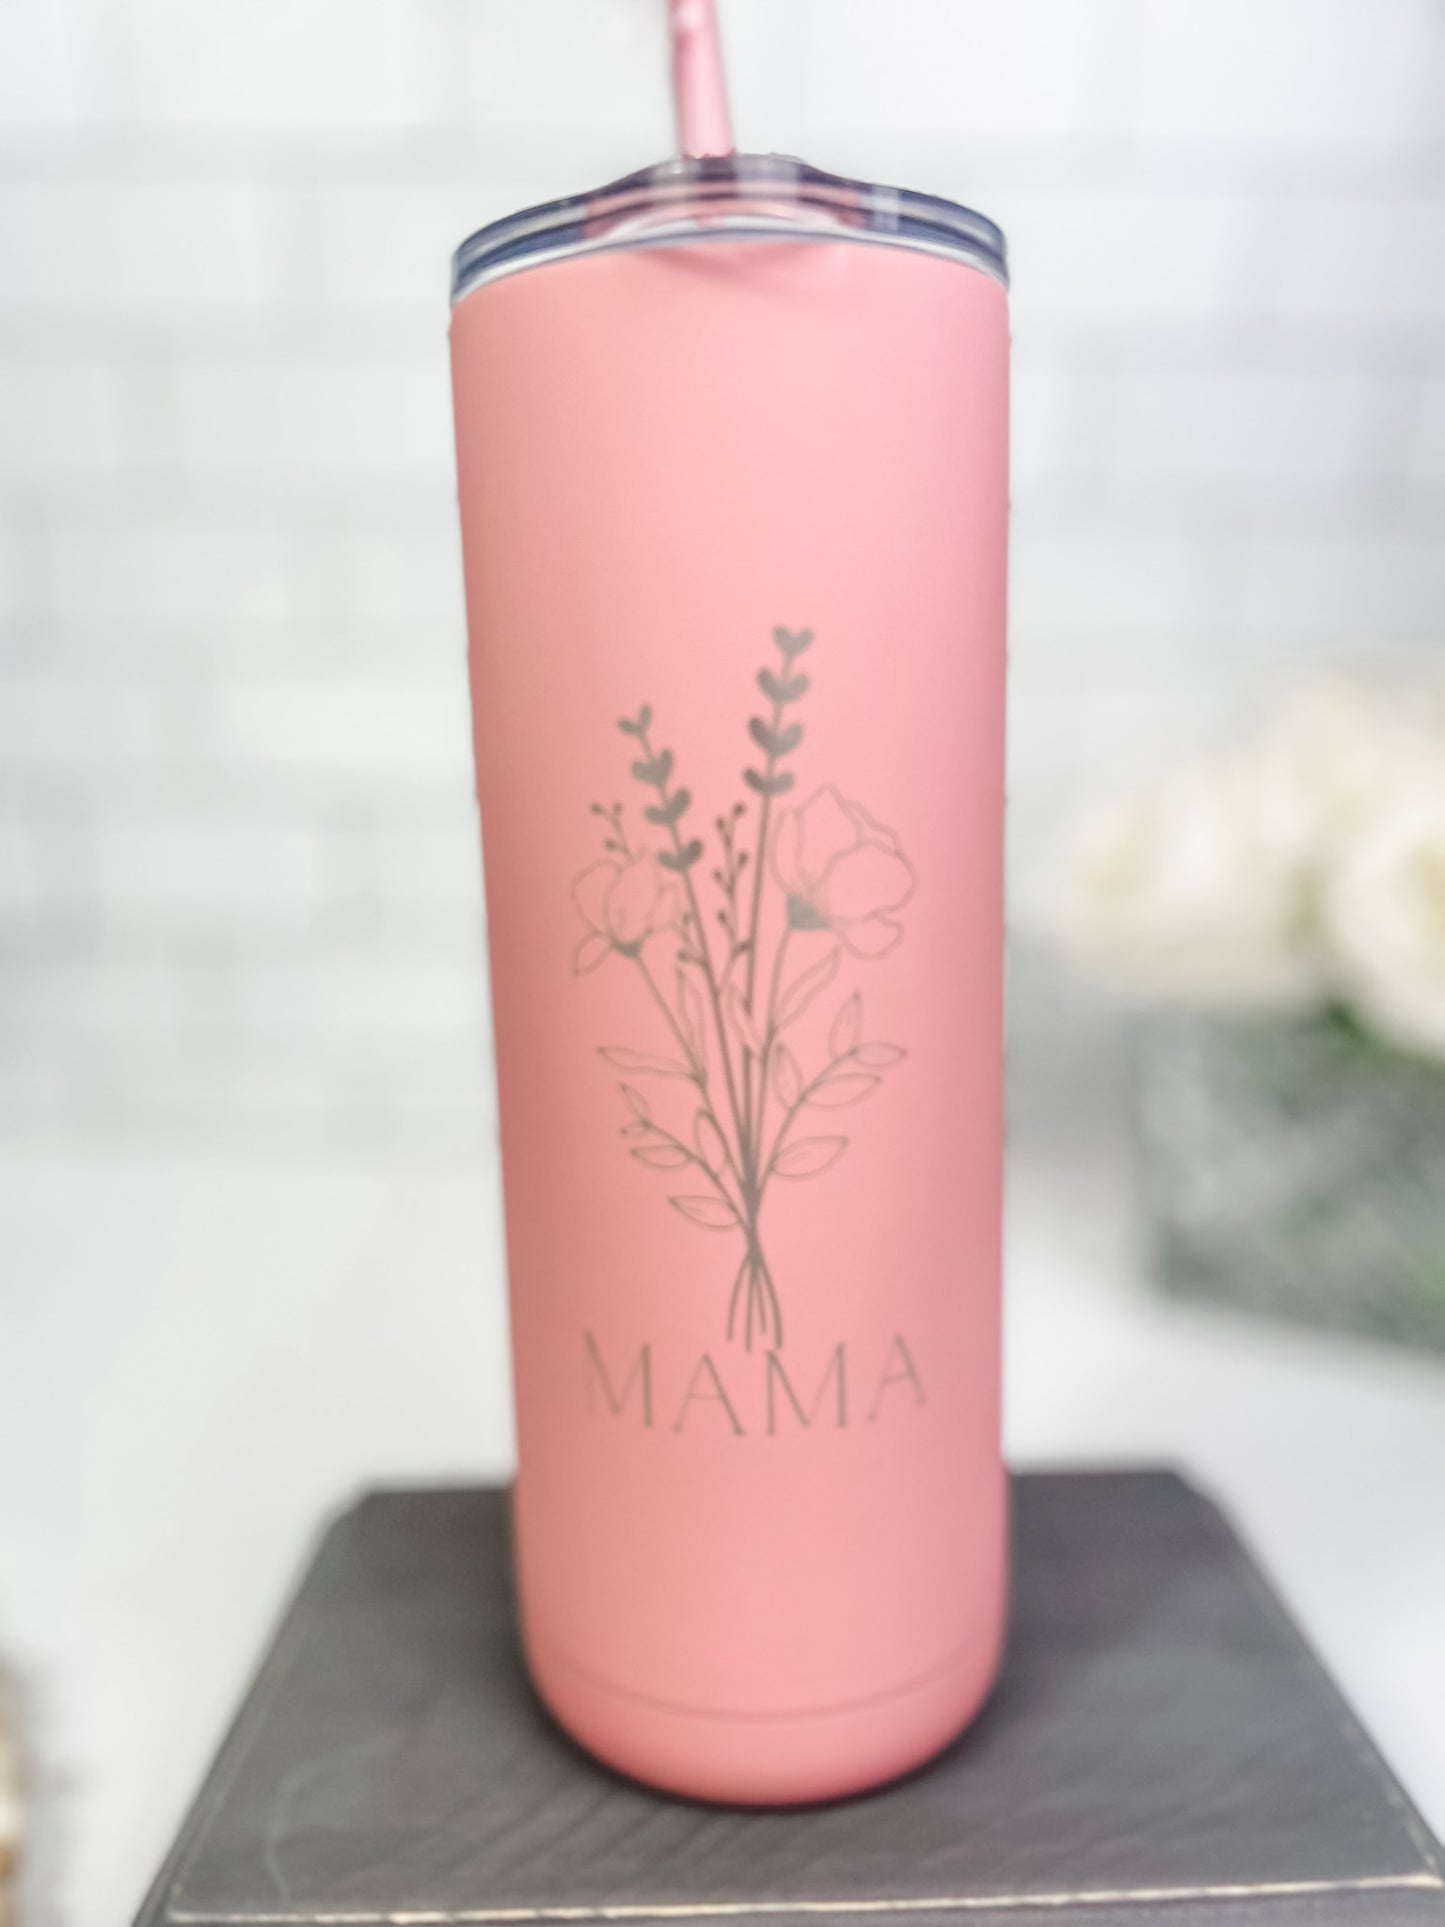 Floral Personalized Drink Tumbler